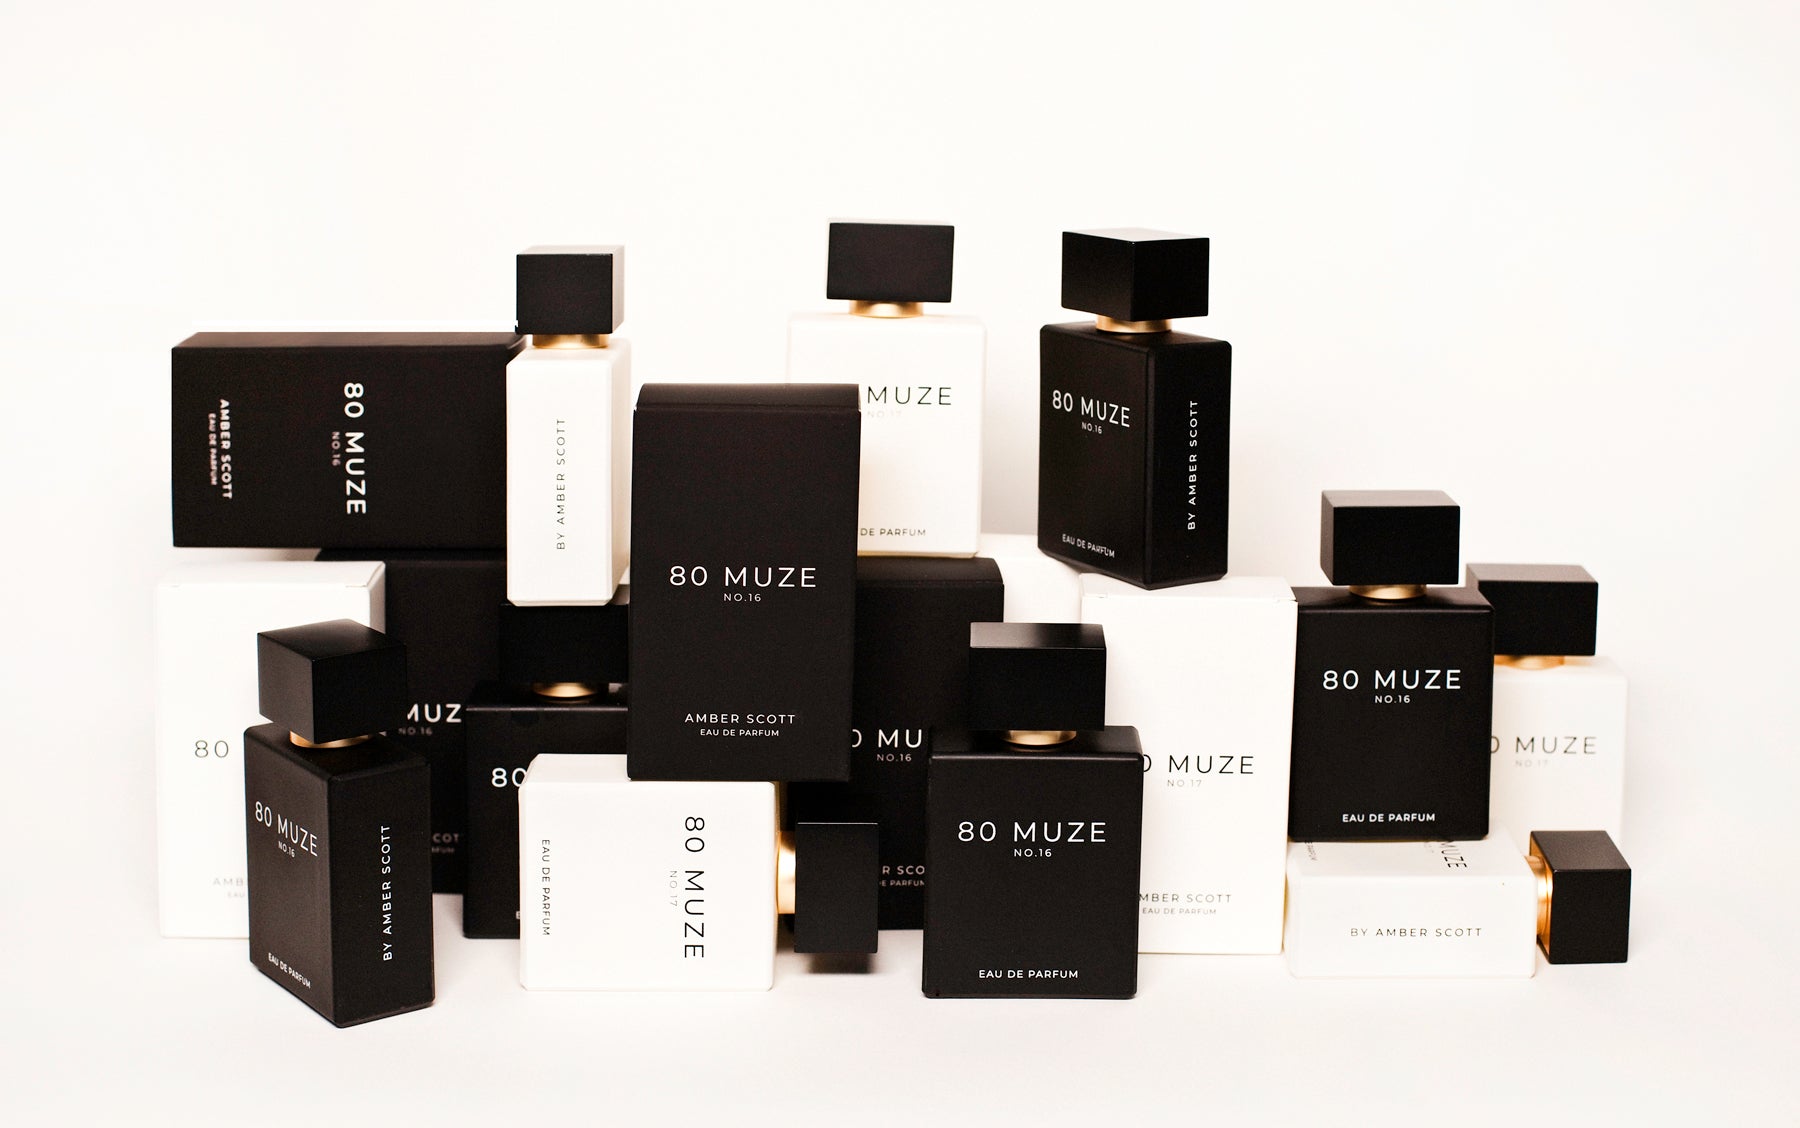 80 muze natural fall 2021 launch fragrance collection. This is Amber Scotts first fragrance product in market. Amber Scott has spent 20+ in the fashion and beauty industry.